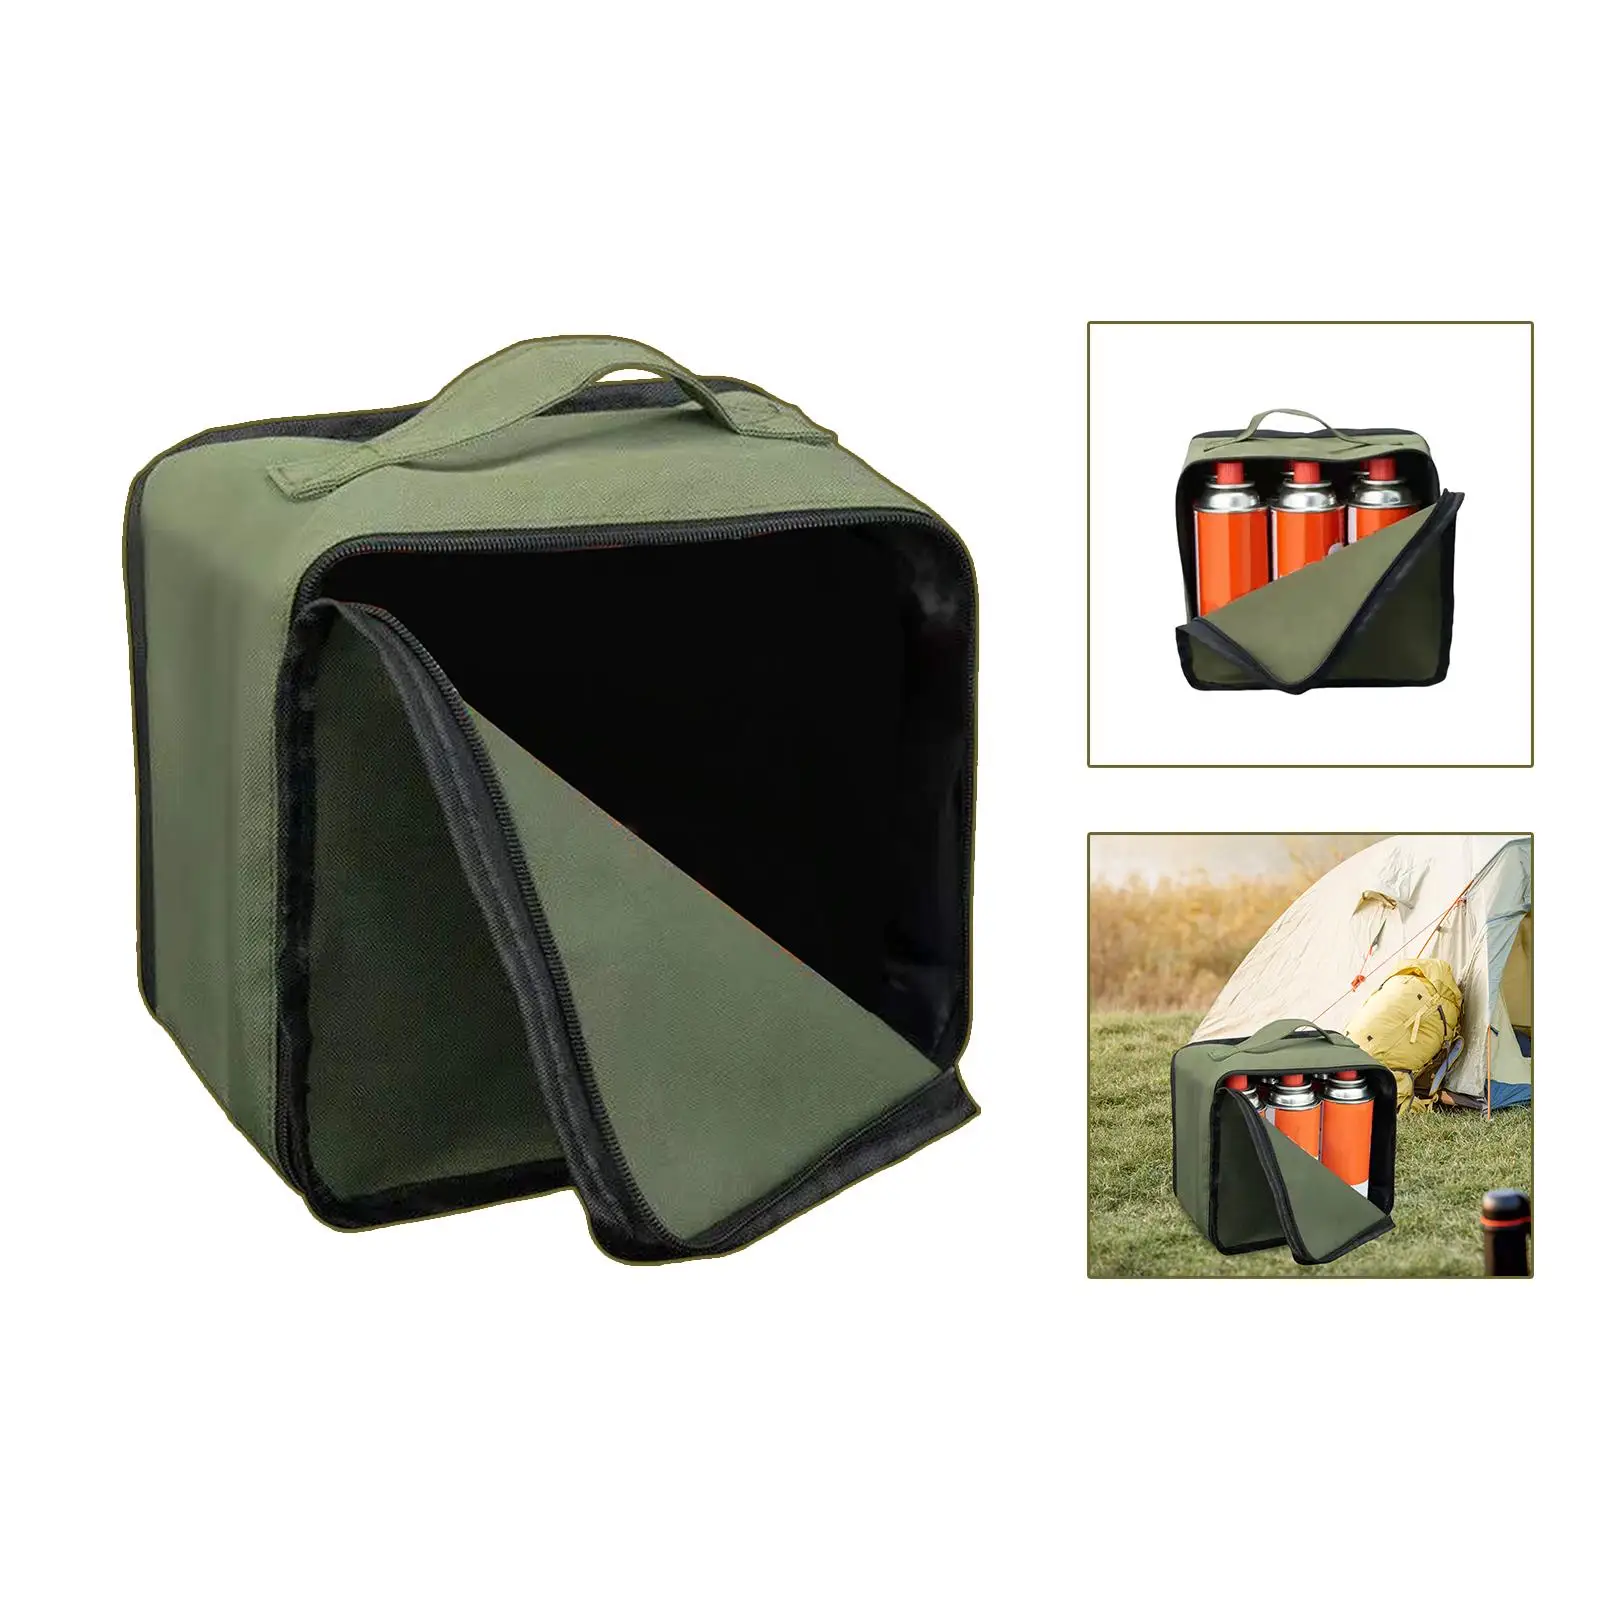 Home Gas Tank Storage Bags Organizer Durable for Picnic Backpacking Kitchen